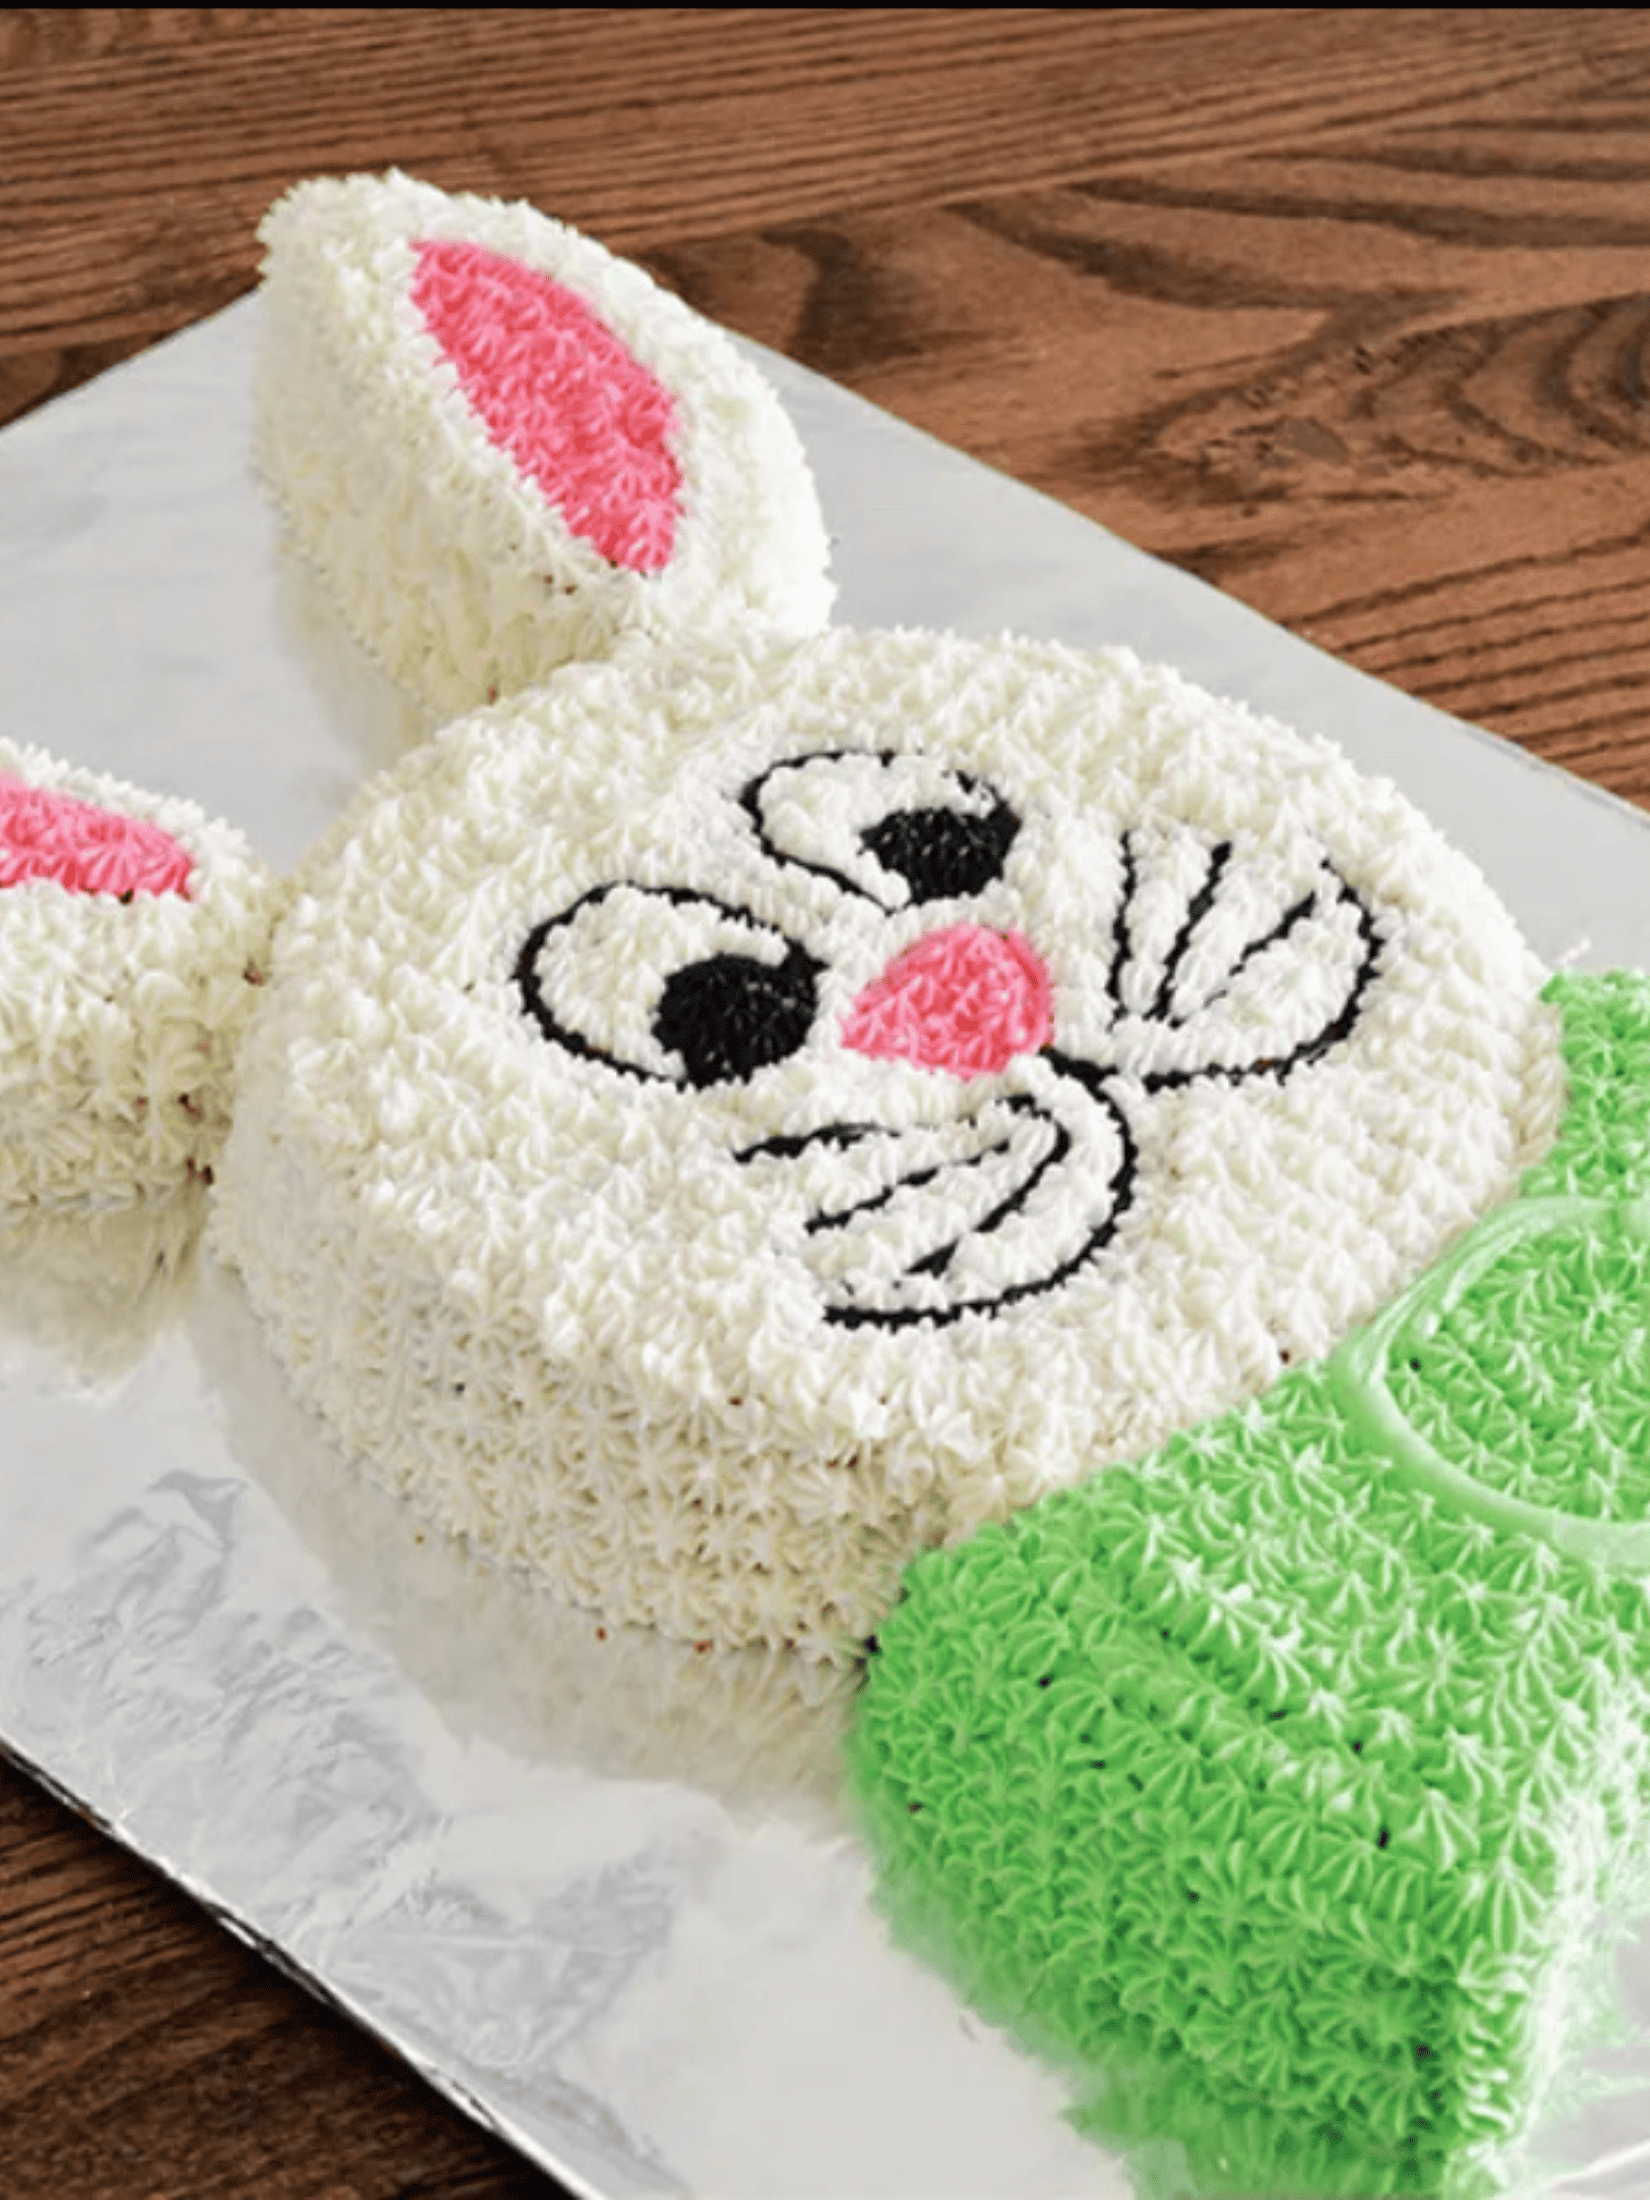 a decorative bunny-shaped cake with pastel-colored frosting.